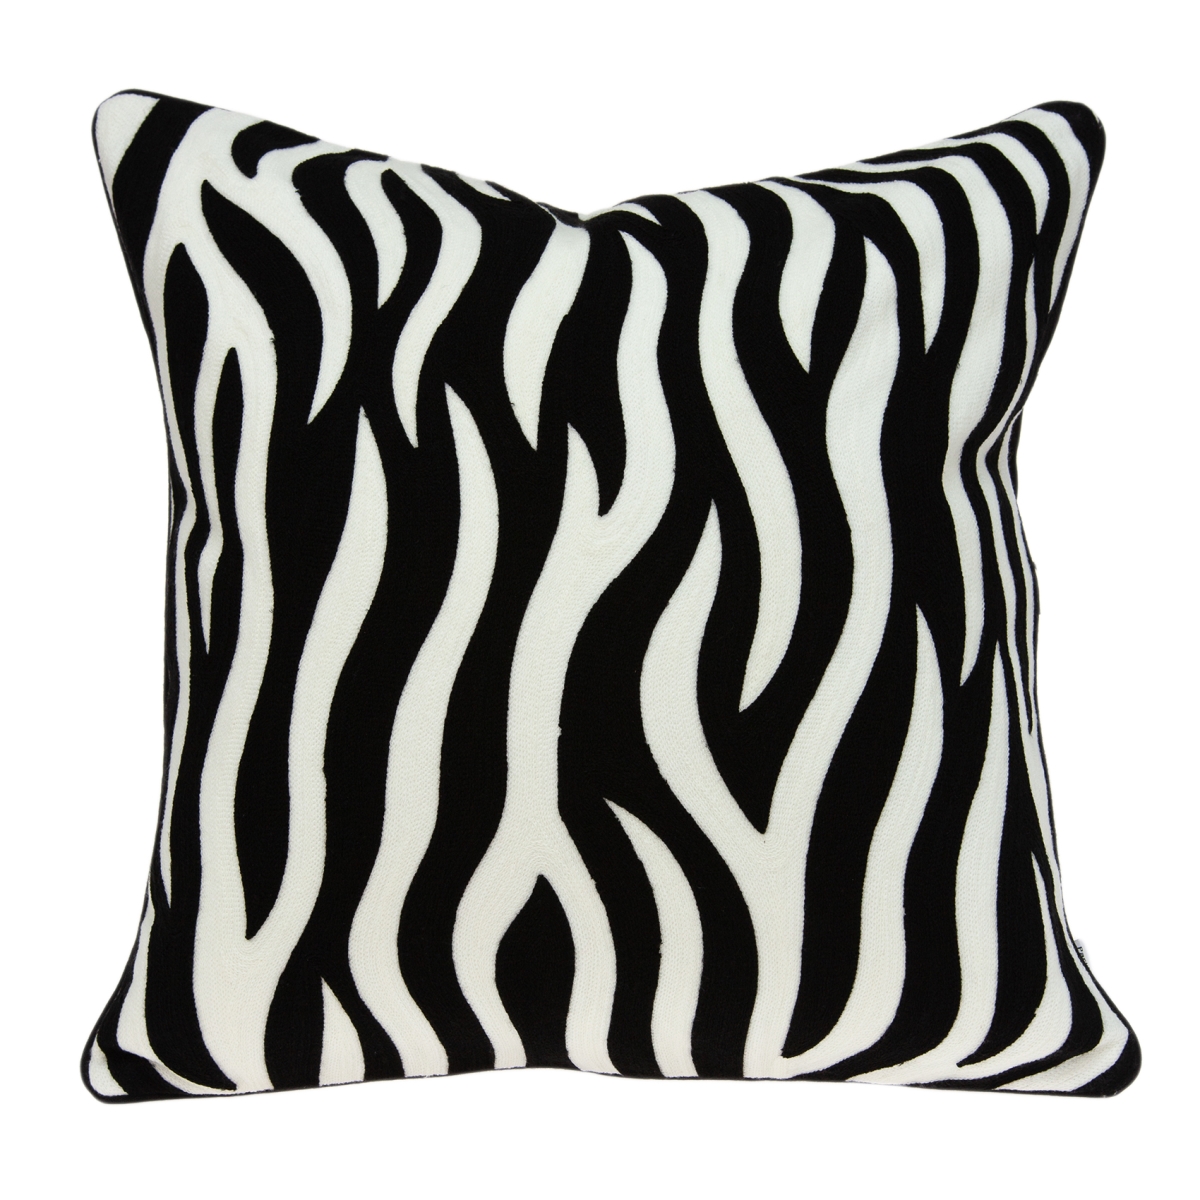 Pila11003p Simba Black & White Square Transitional Pillow Cover With Poly Insert - 20 X 20 X 7 In.